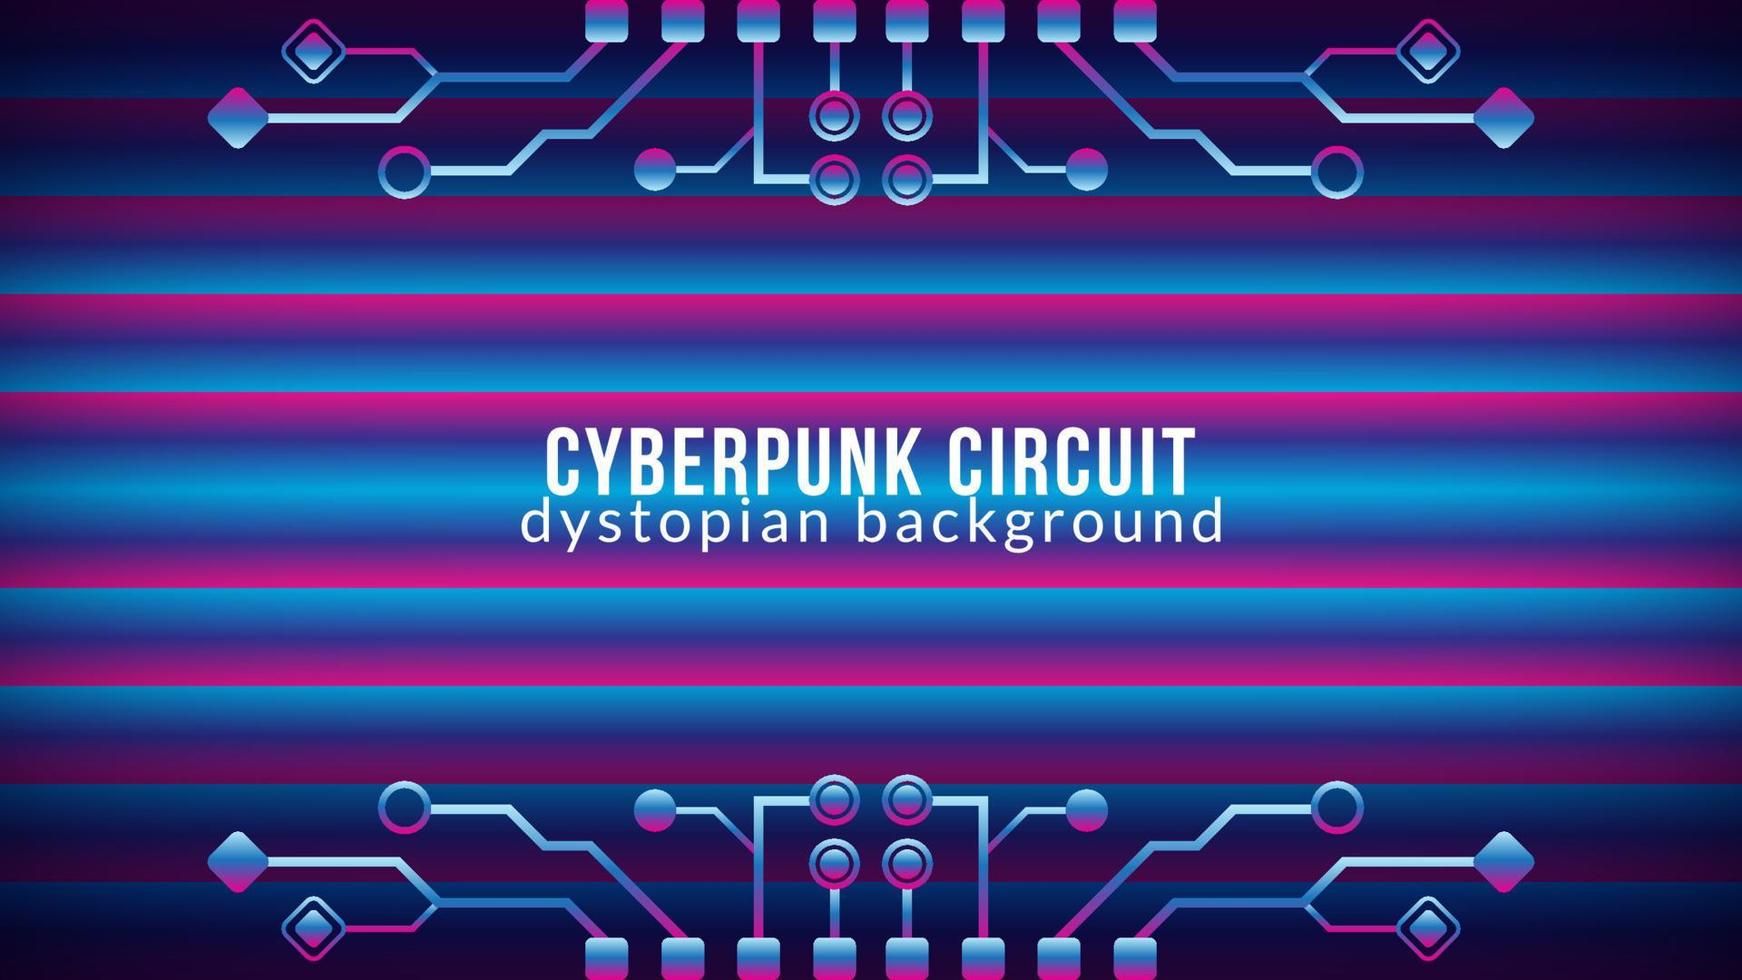 Cyberpunk Circuit With Gradient Bar Pattern. Dystopian Electronic Tree Shape Vector Illustration. Abstract Background Design Template. Blue Pink Purple Violet Gradient Color Theme.